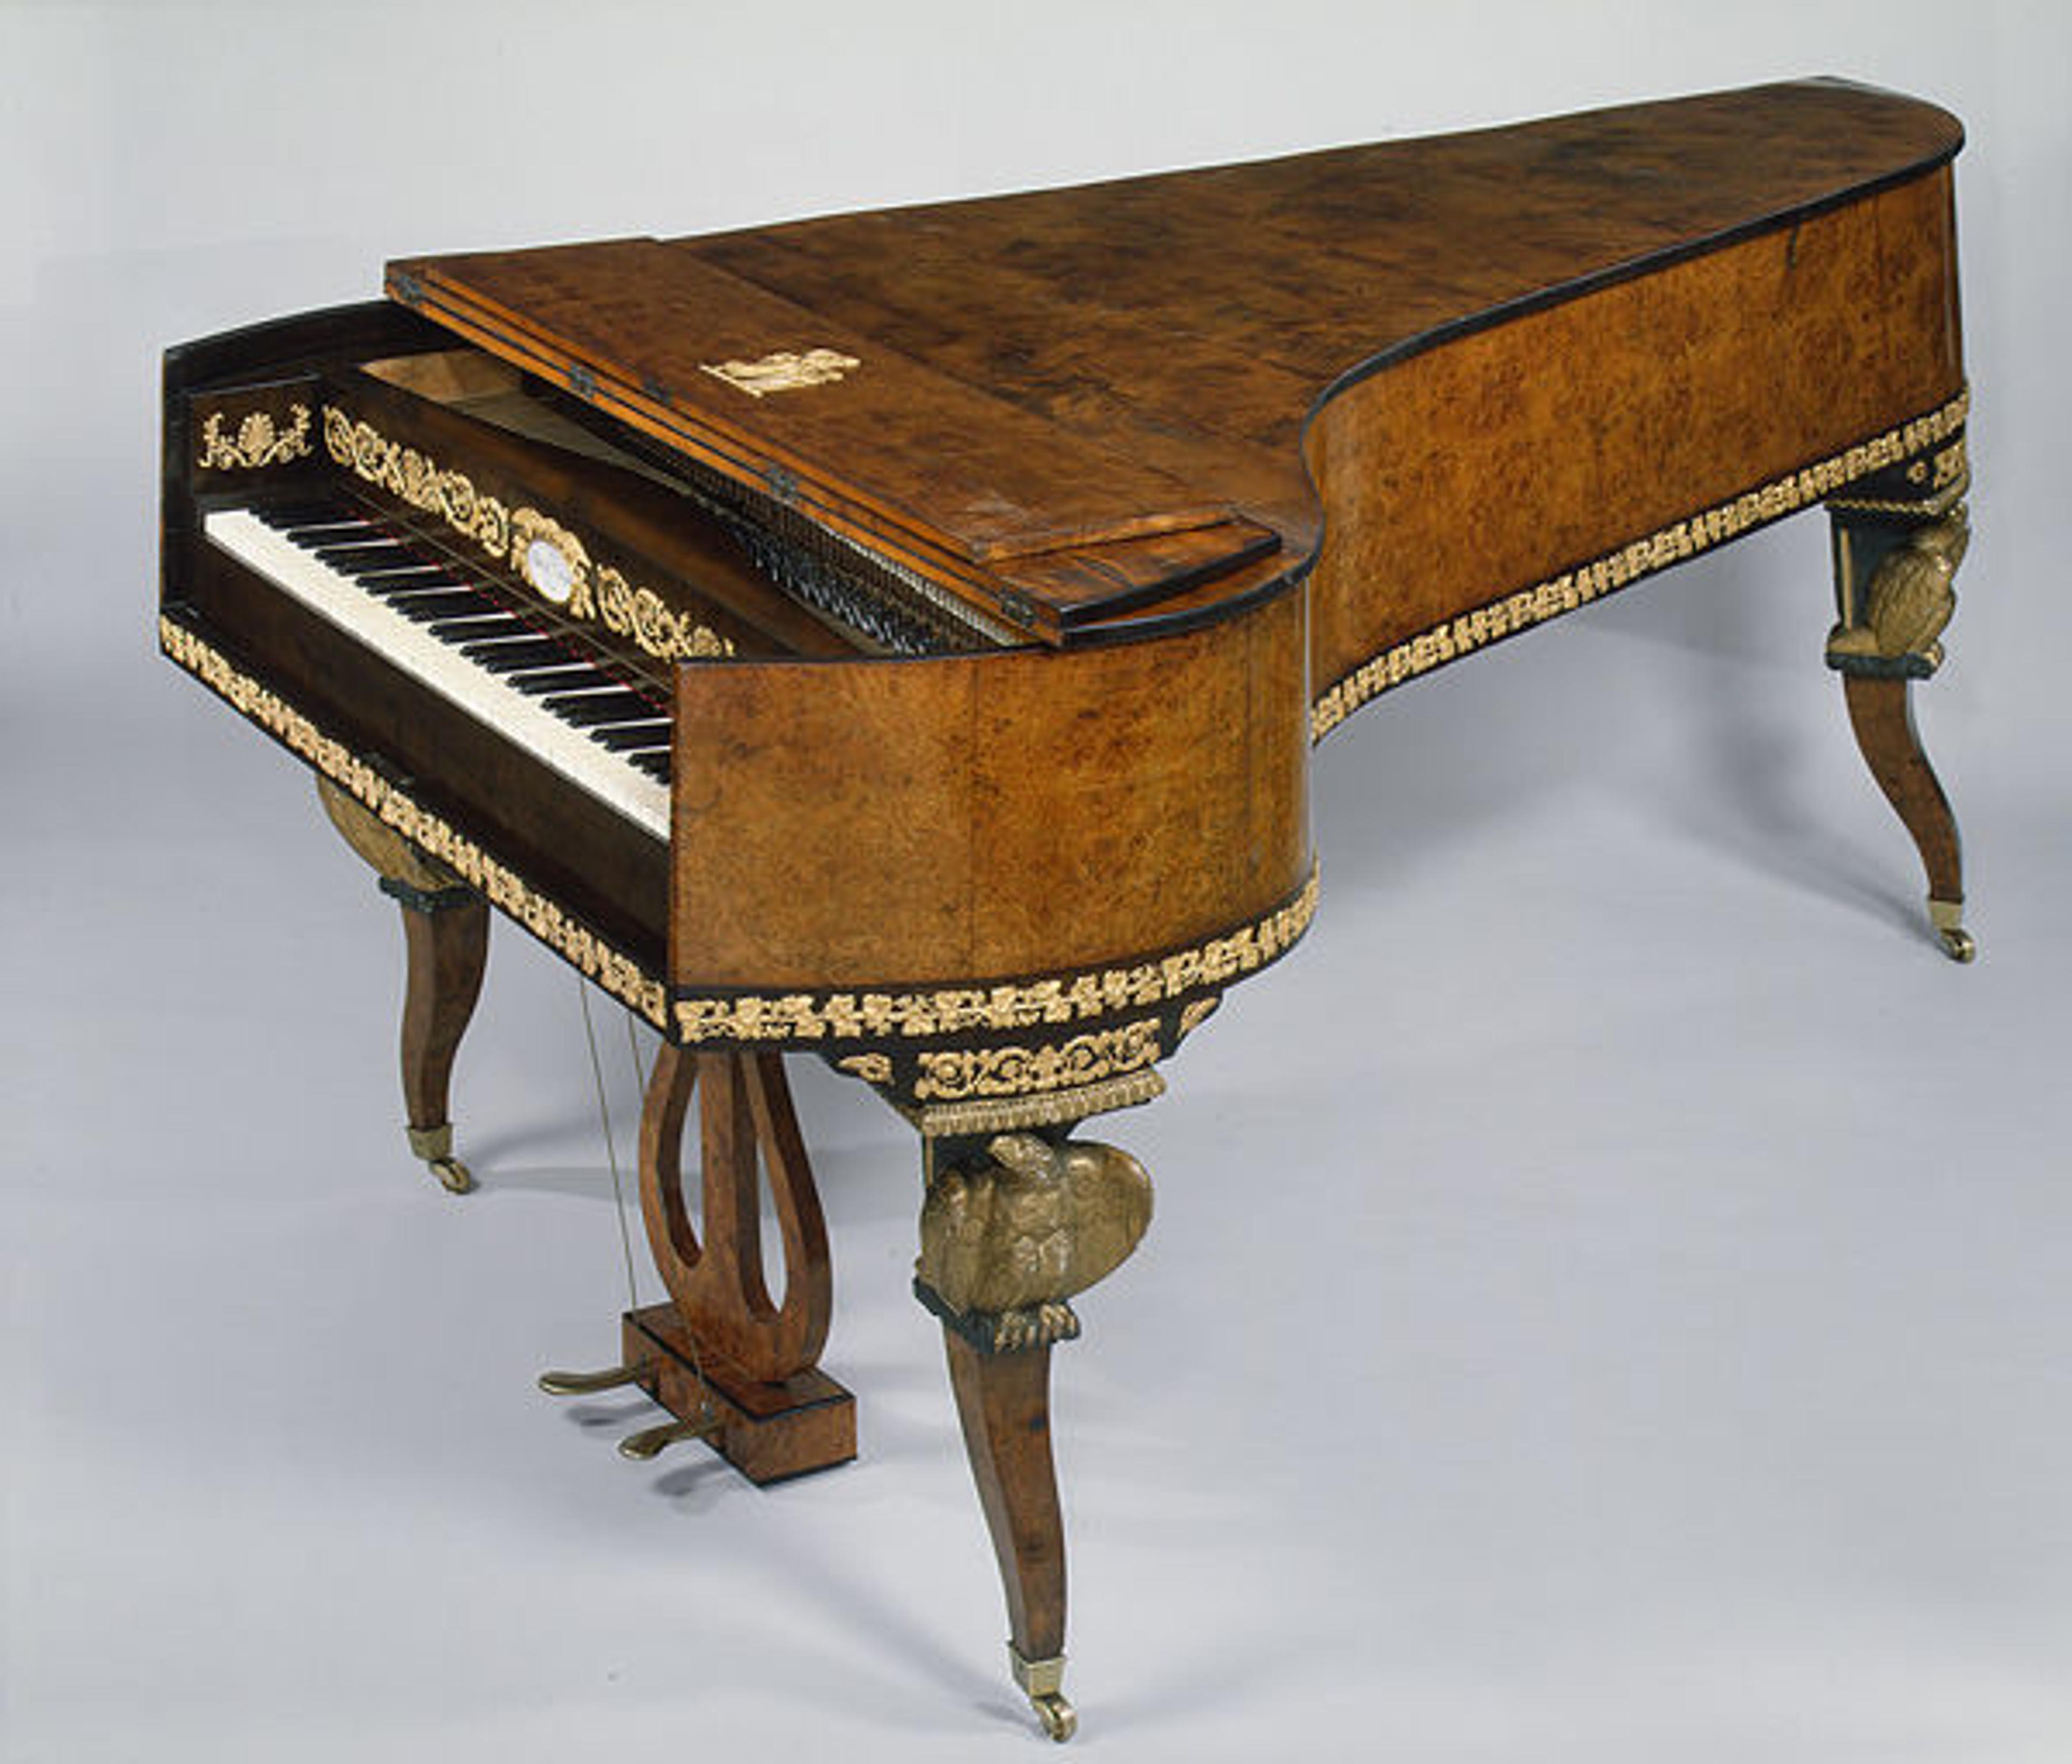 Joseph Böhm (Austrian, 1786–ca.1850). Grand piano, ca. 1815–20. Wood, various materials. The Metropolitan Museum of Art, New York, Purchase, Rogers Fund; Mr. and Mrs. Thatcher M. Brown III, Mr. and Mrs. Philip J. Hess, Carroll Music Instrument Service Corp., The New York Flute Club Inc. and Piano Technicians; Guild Gifts; Gifts of Mrs. Etta M Helmer, Alice Getty, Mr. and Mrs. Henry Wellman, Mr. and Mrs. Peter M. F. Sichel, Craig E. Steese, Hilda Katz, Mr. and Mrs. Arthur A. Travis, and The Crosby Brown Collection of Musical Instruments, by exchange; and funds from various donors, 1982 (1982.138)